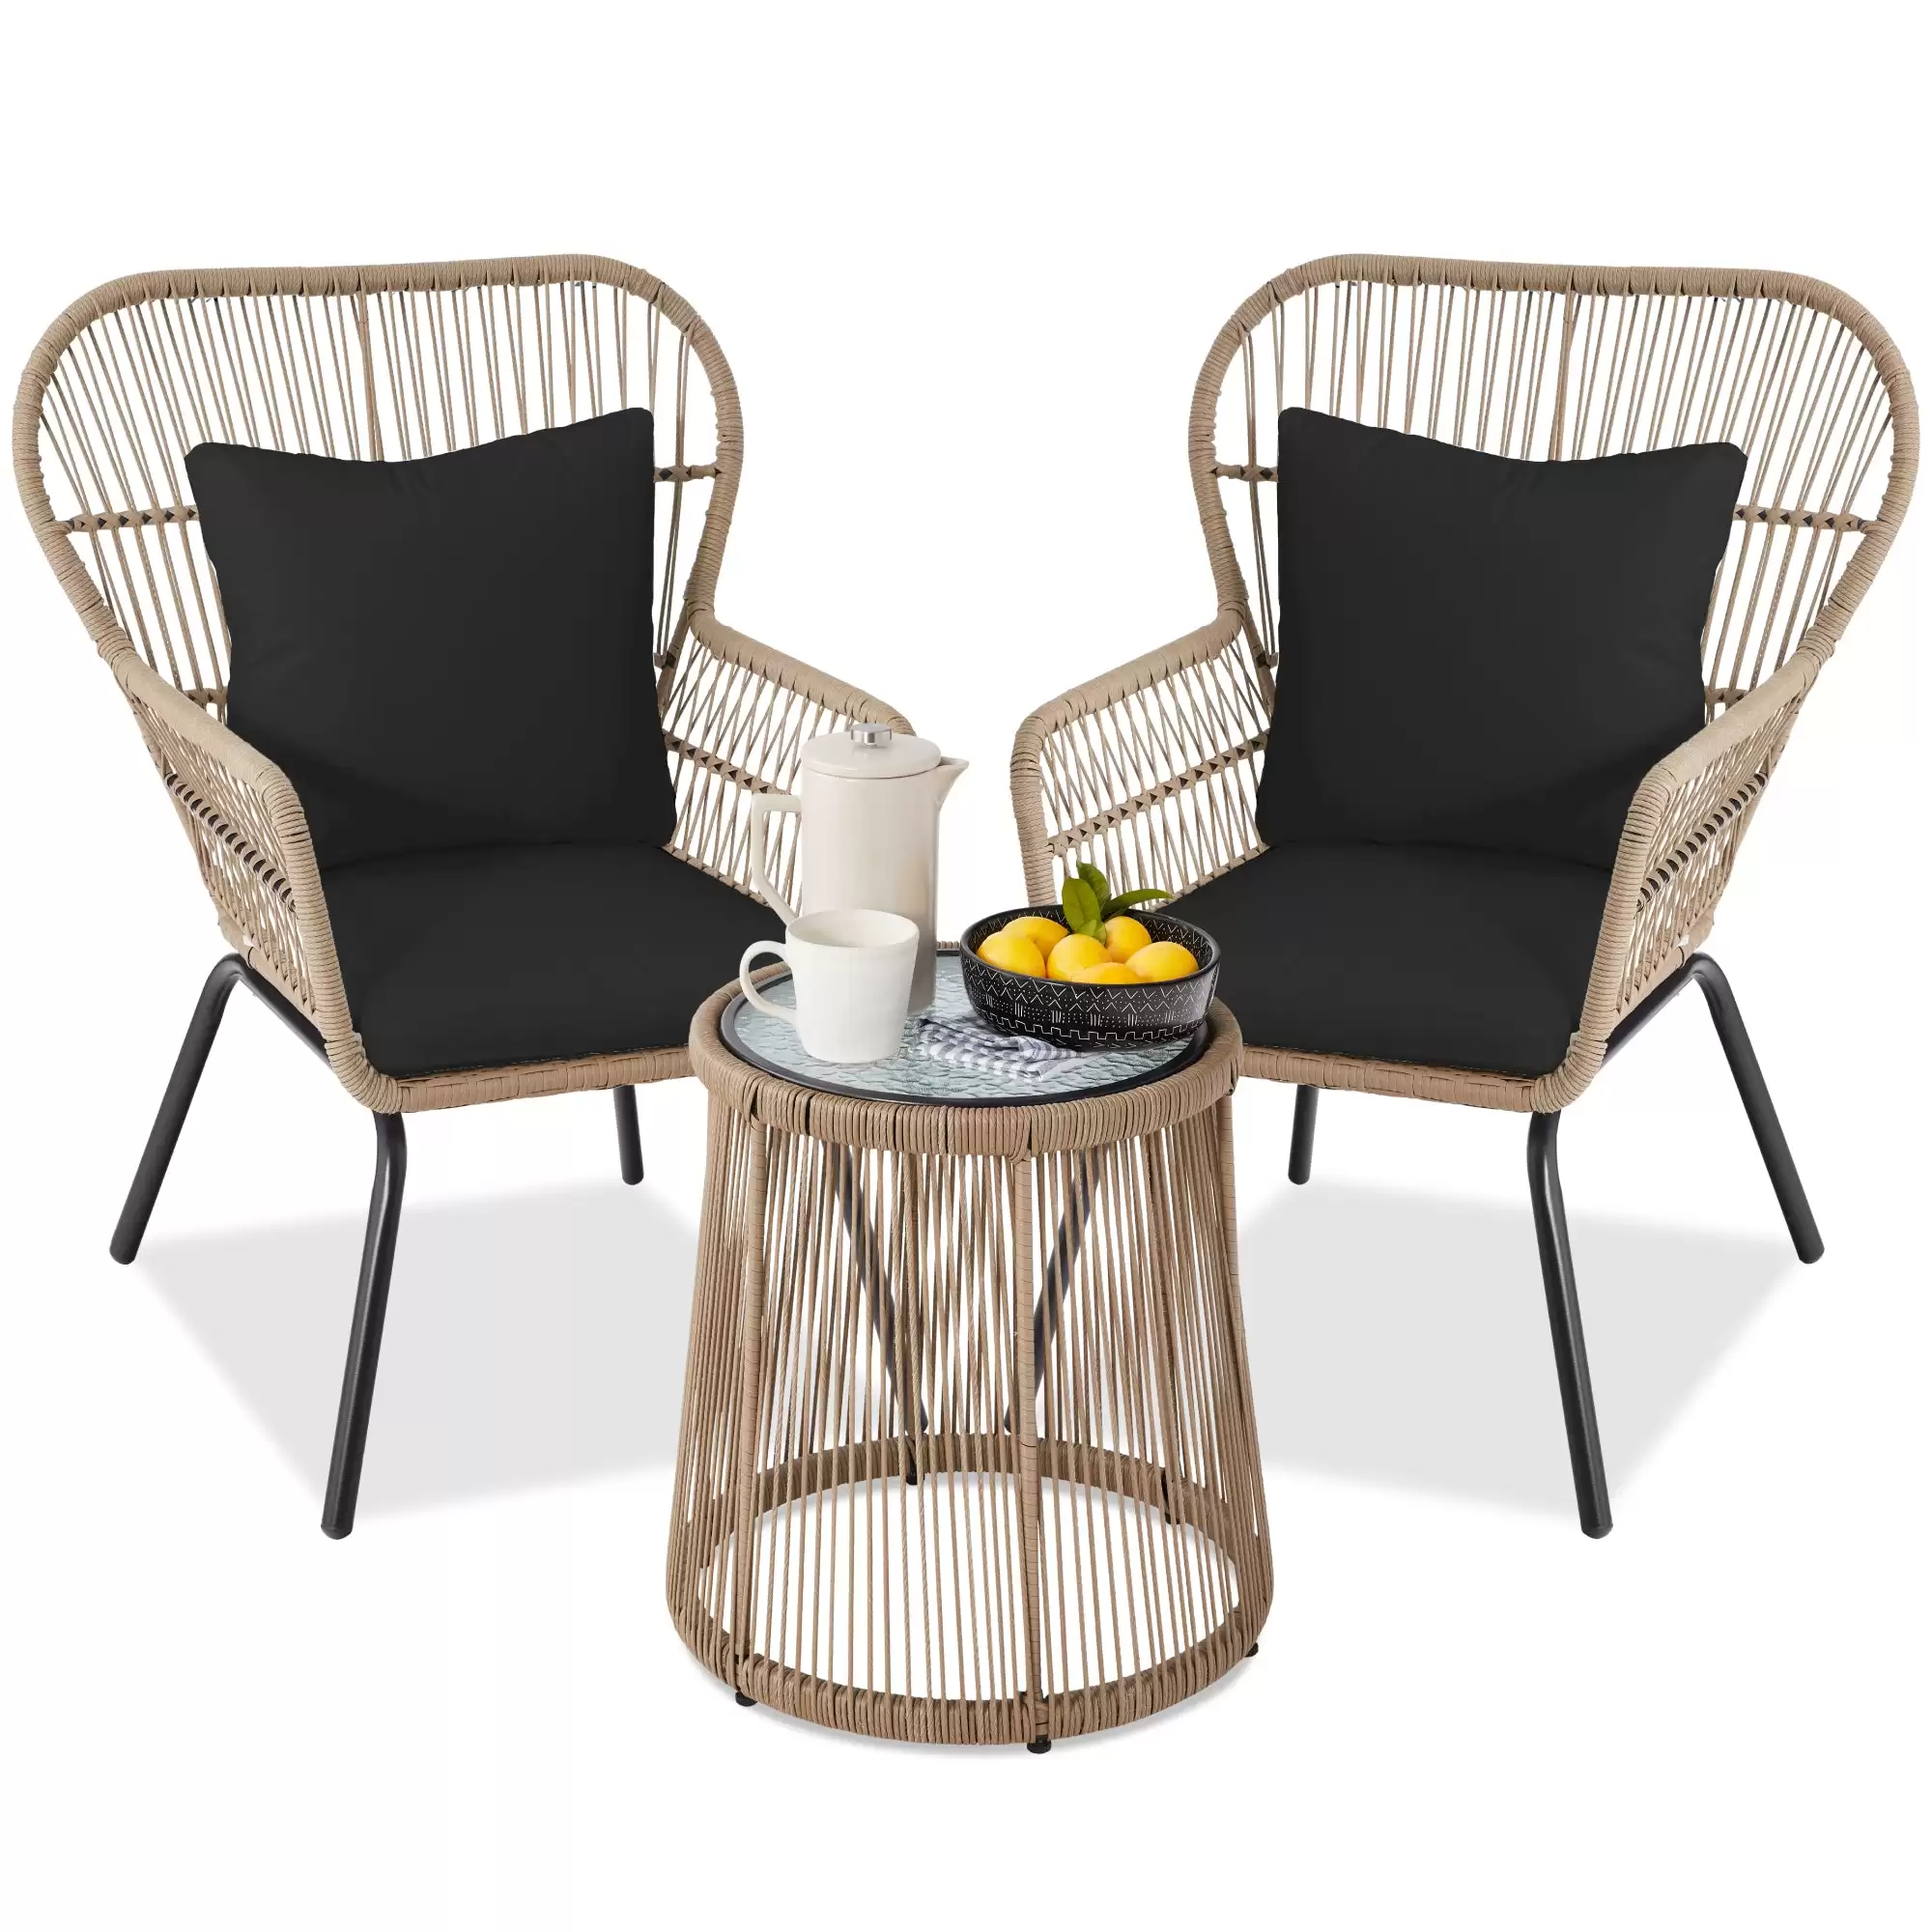 Starting At $149.99 3-Piece Patio Wicker Conversation Bistro Set W/ 2 Chairs, Glass Top Table Using This Bestchoiceproducts Discount Code